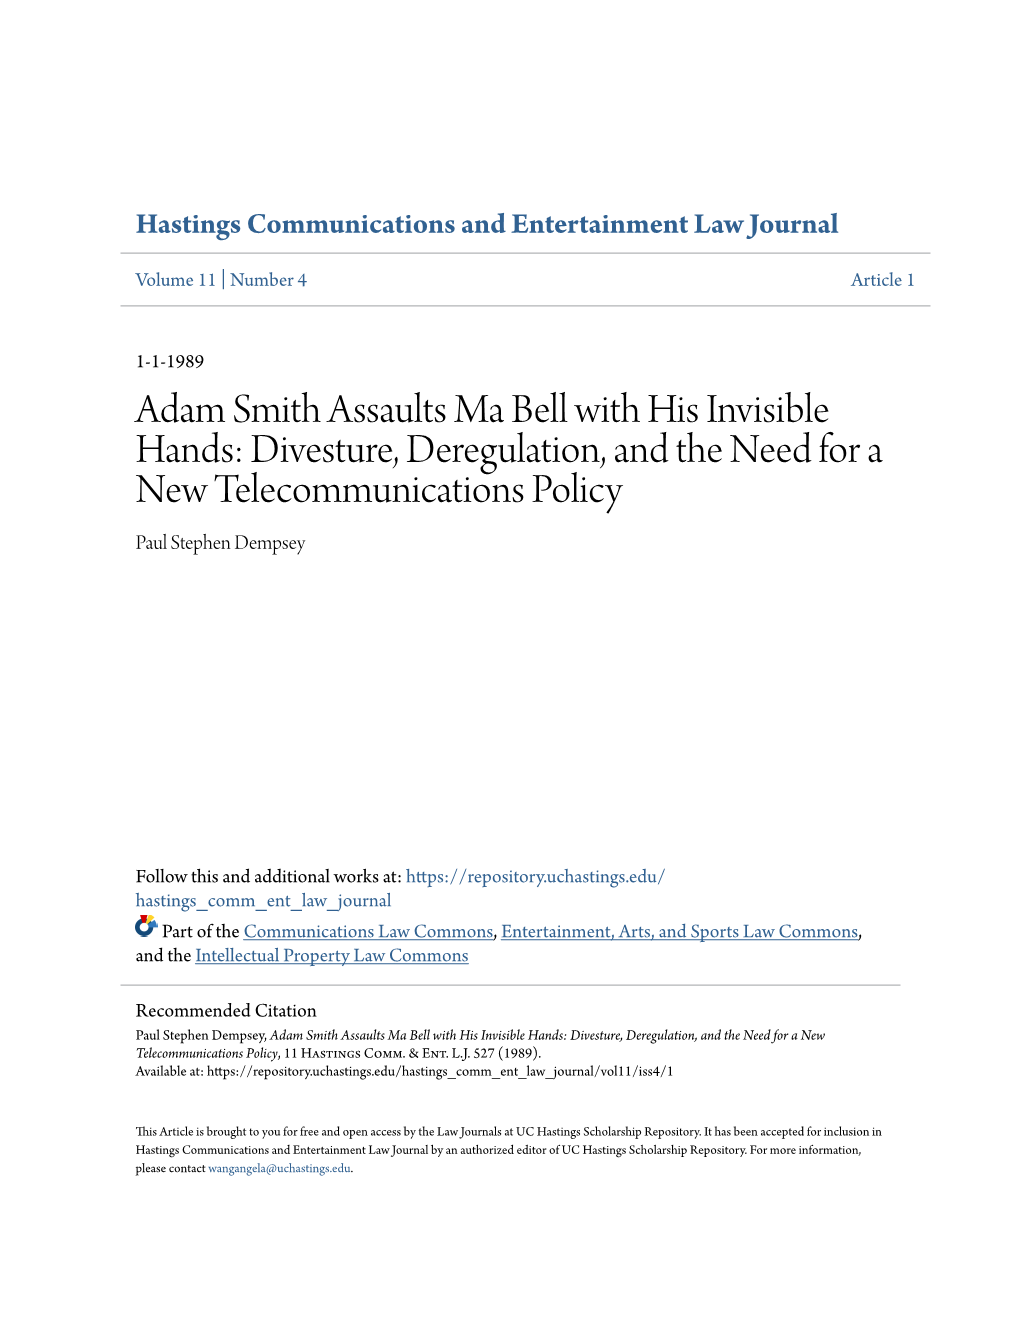 Adam Smith Assaults Ma Bell with His Invisible Hands: Divesture, Deregulation, and the Need for a New Telecommunications Policy Paul Stephen Dempsey